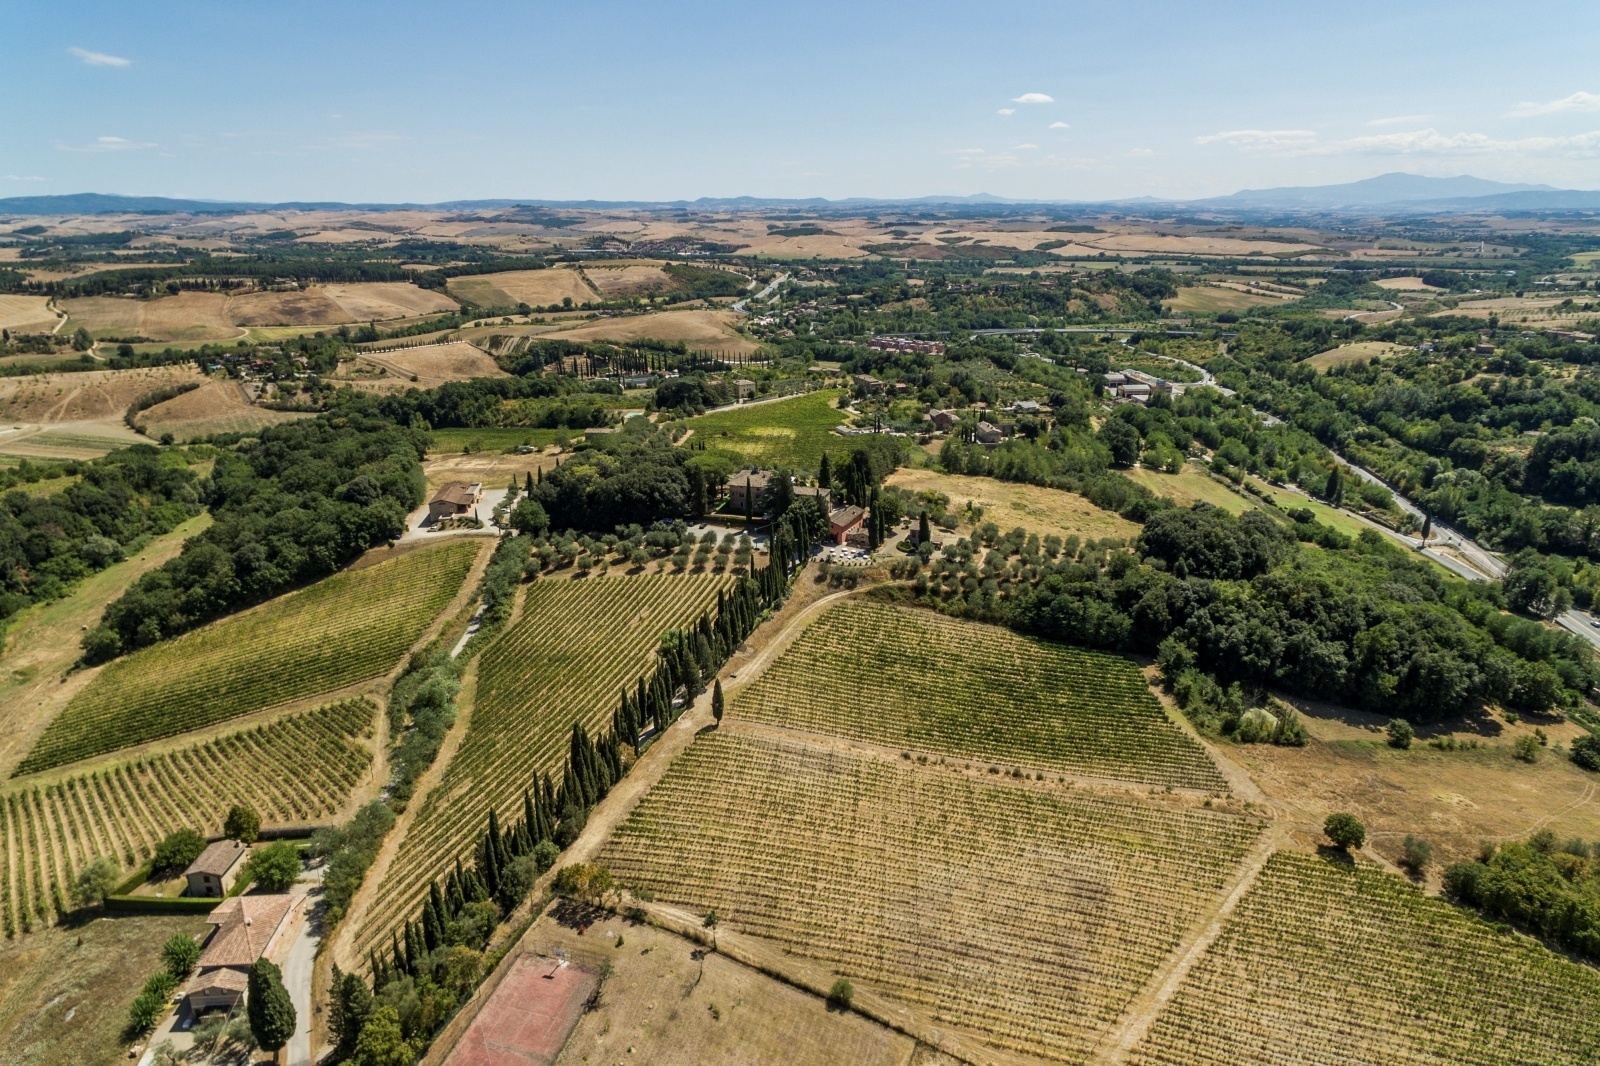 Wonderful Castle with Winery and Period Residence near Siena - Casa Tuscany